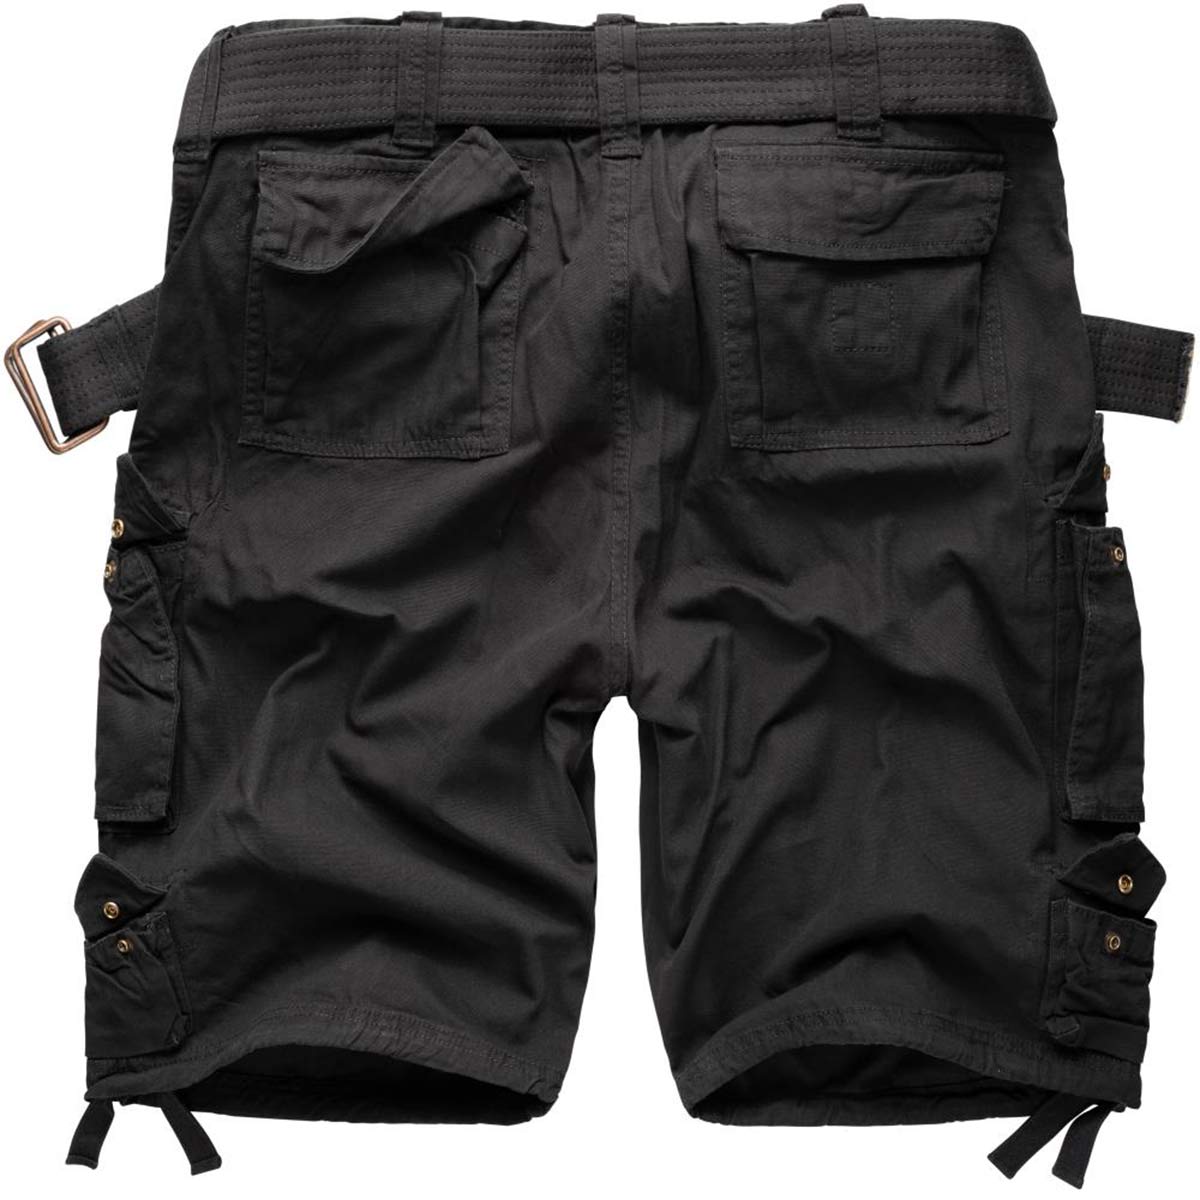 Surplus Division Mens Army Combat Cargo Shorts Work Miltary Style with ...